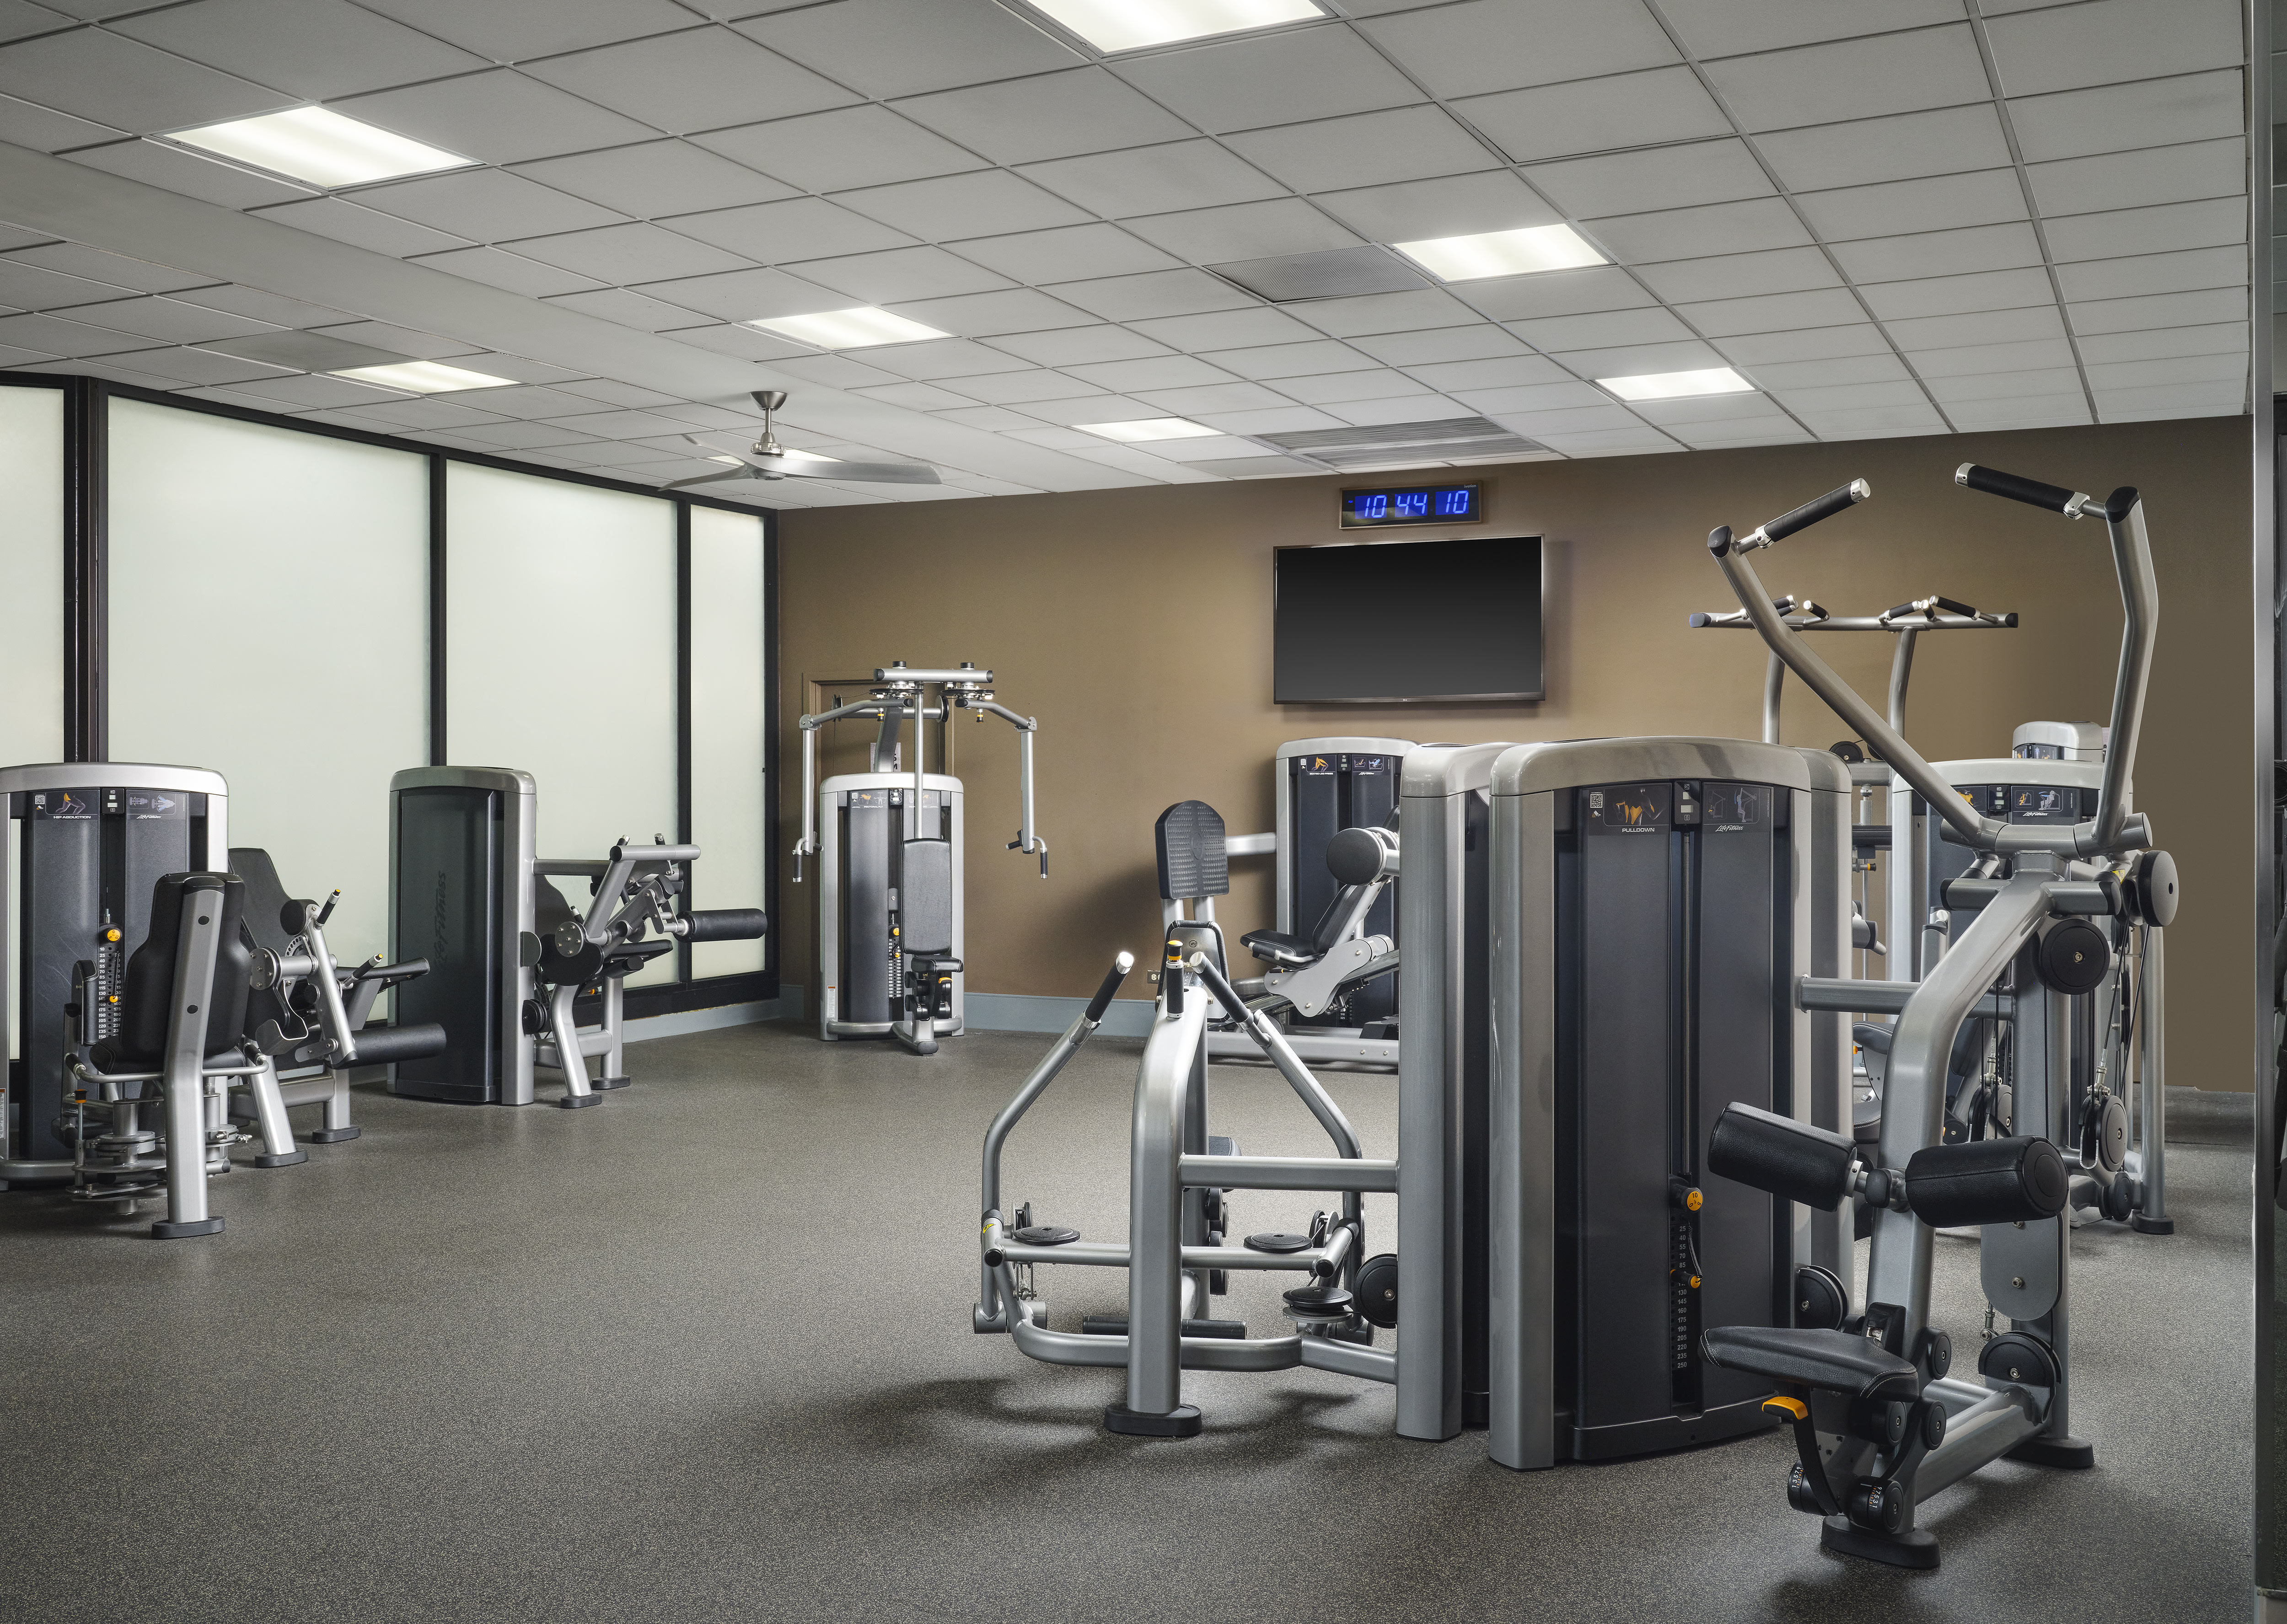 Fitness center with resistance machines